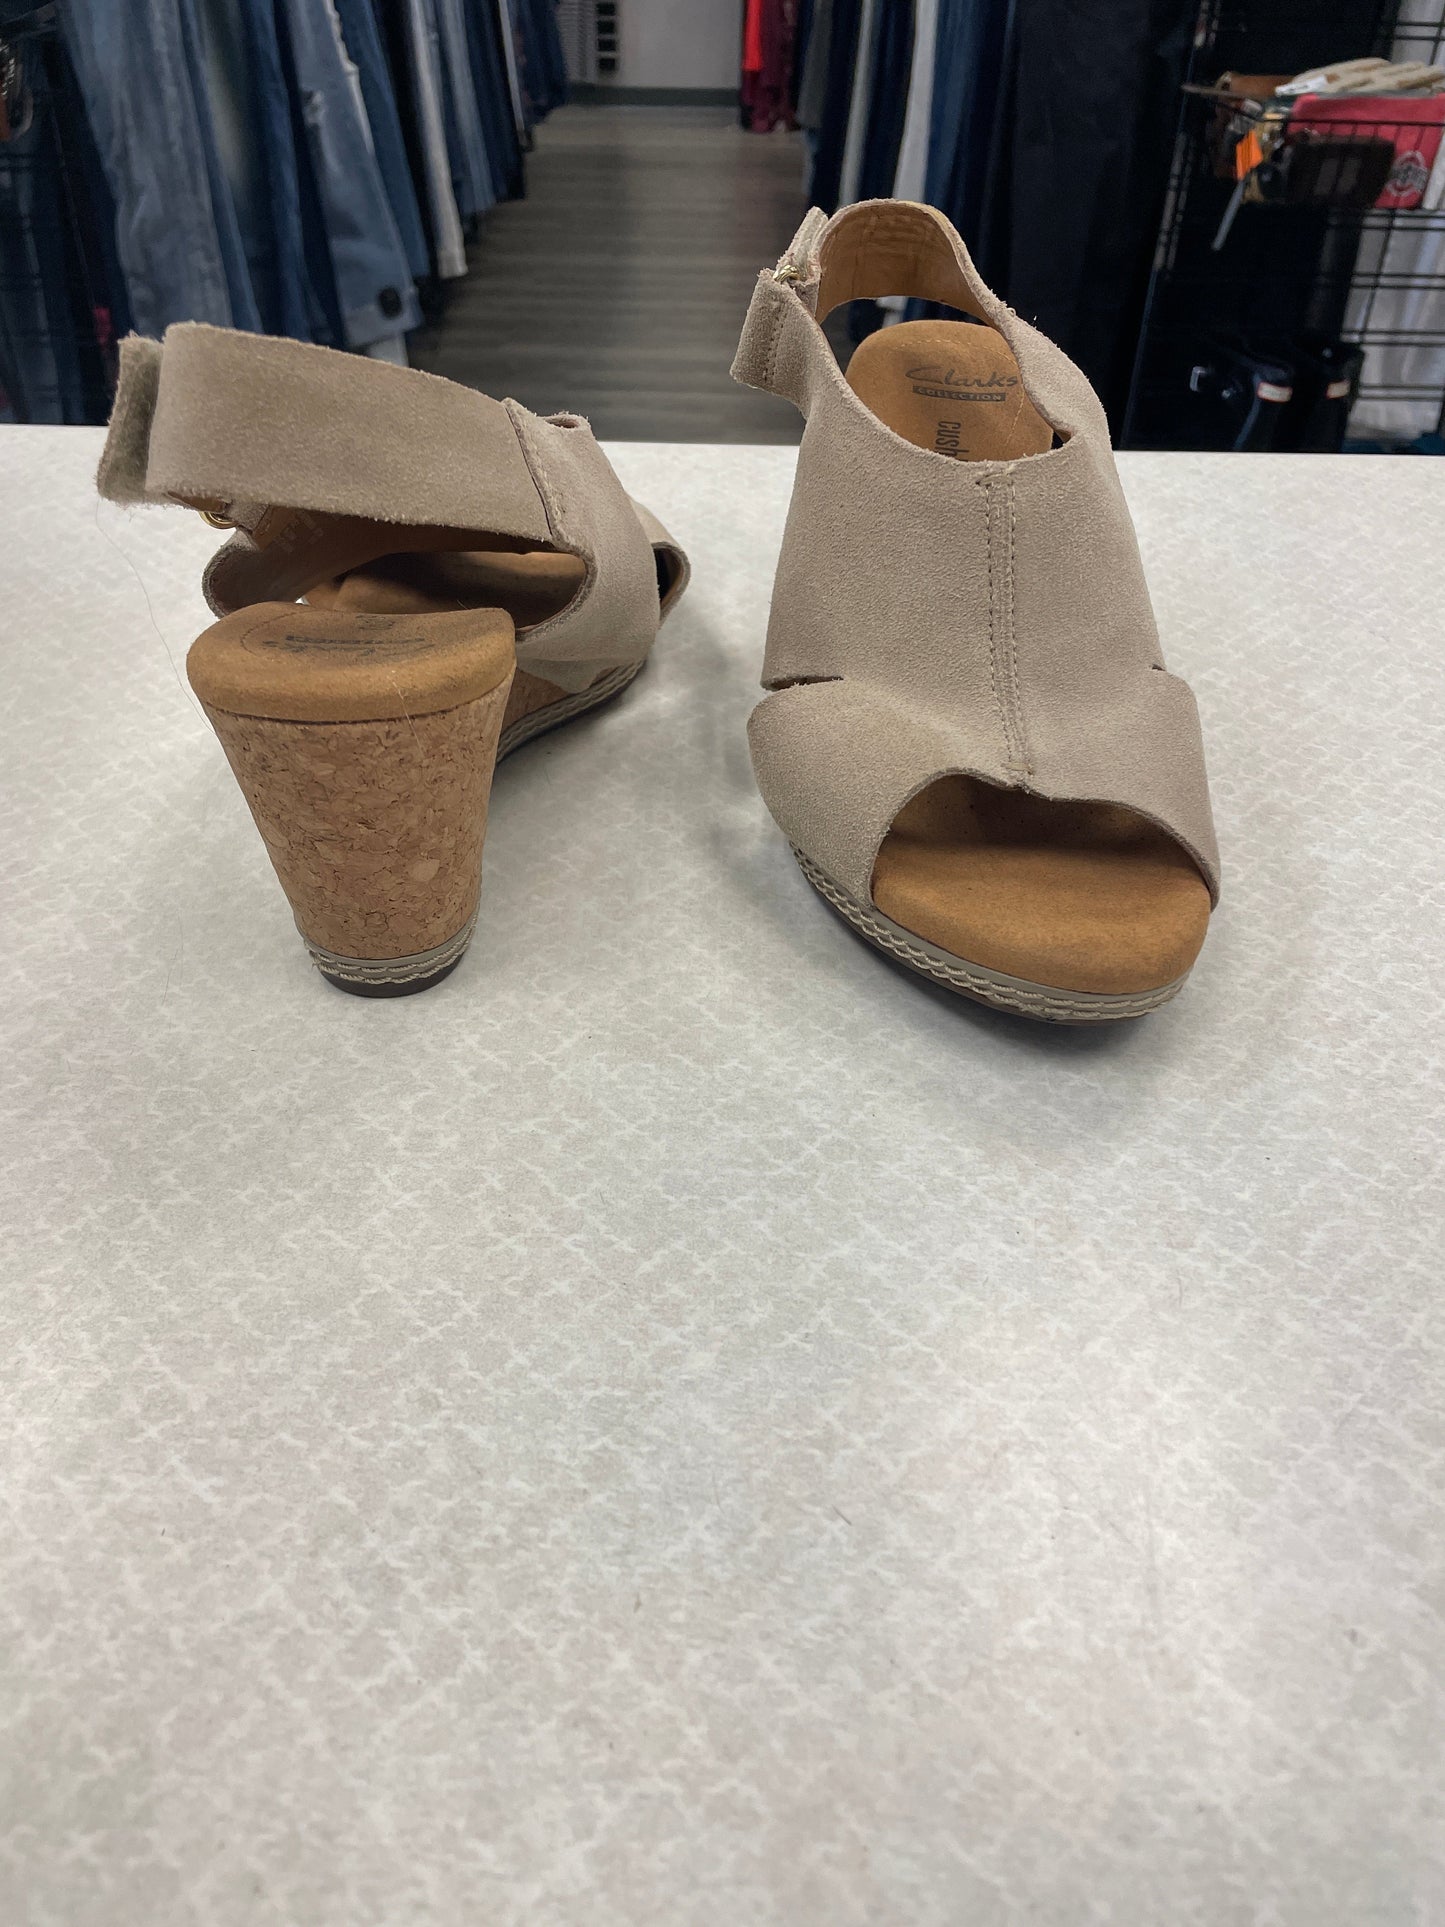 Shoes Heels Wedge By Clarks  Size: 9.5